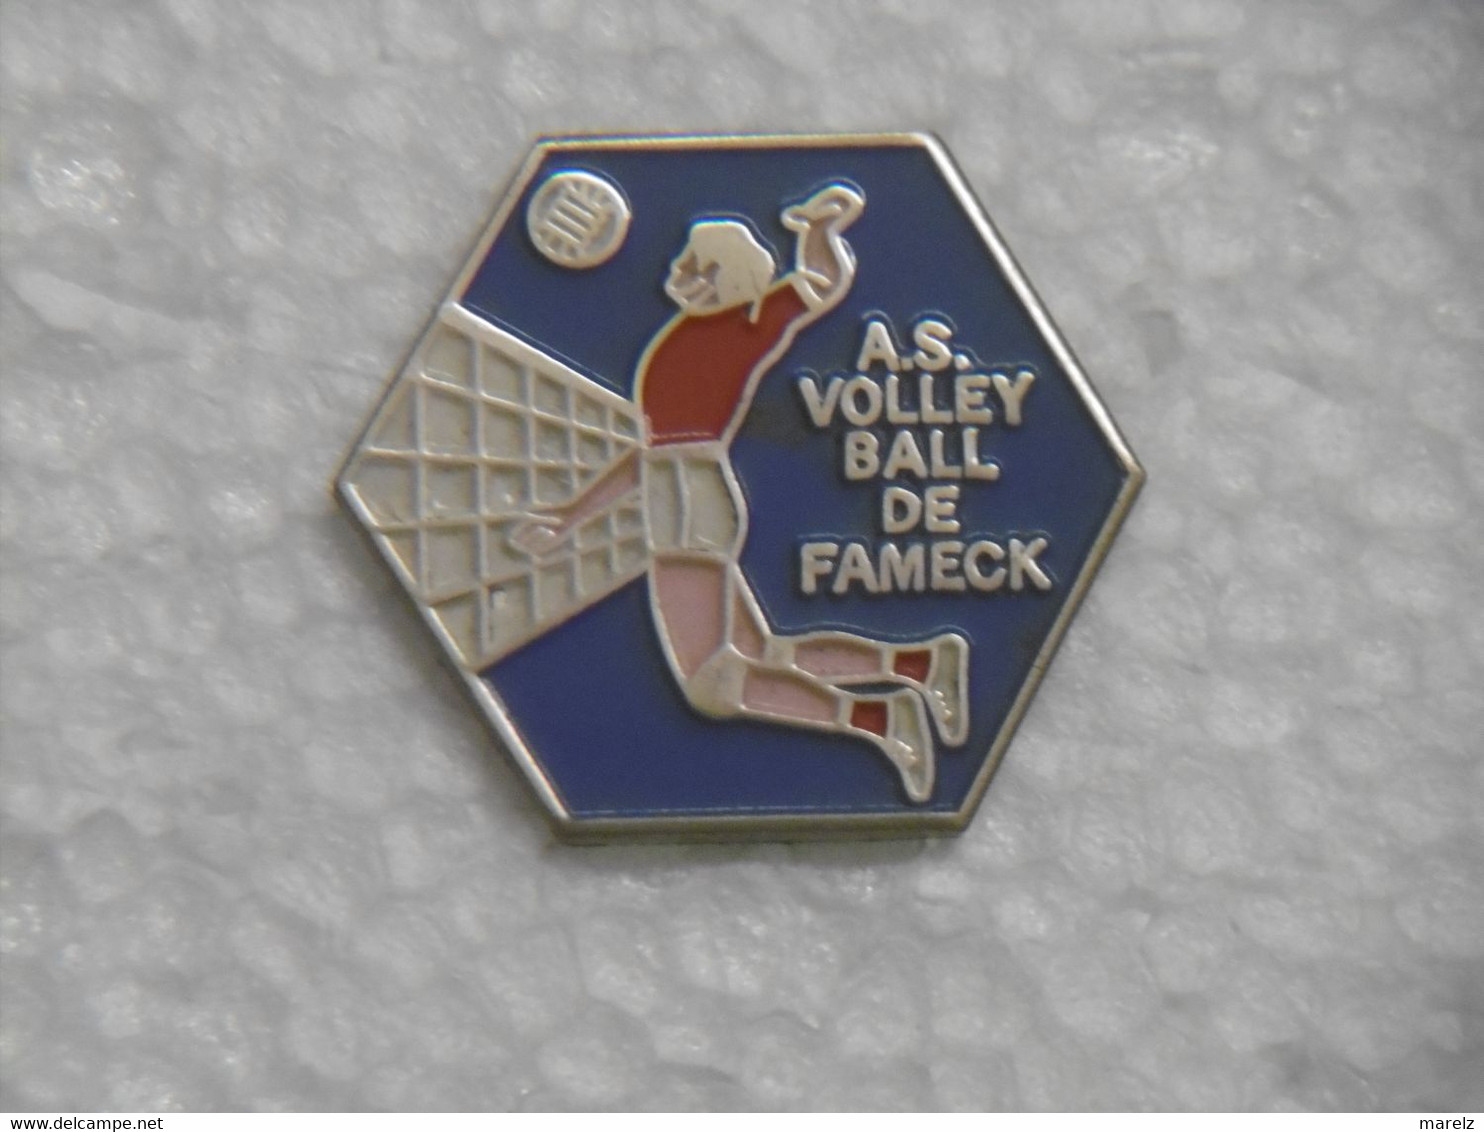 Pin's Sports - A.S. VOLLEYBALL De FAMECK - Pin Badge Volley Ball 57 MOSELLE - Pallavolo